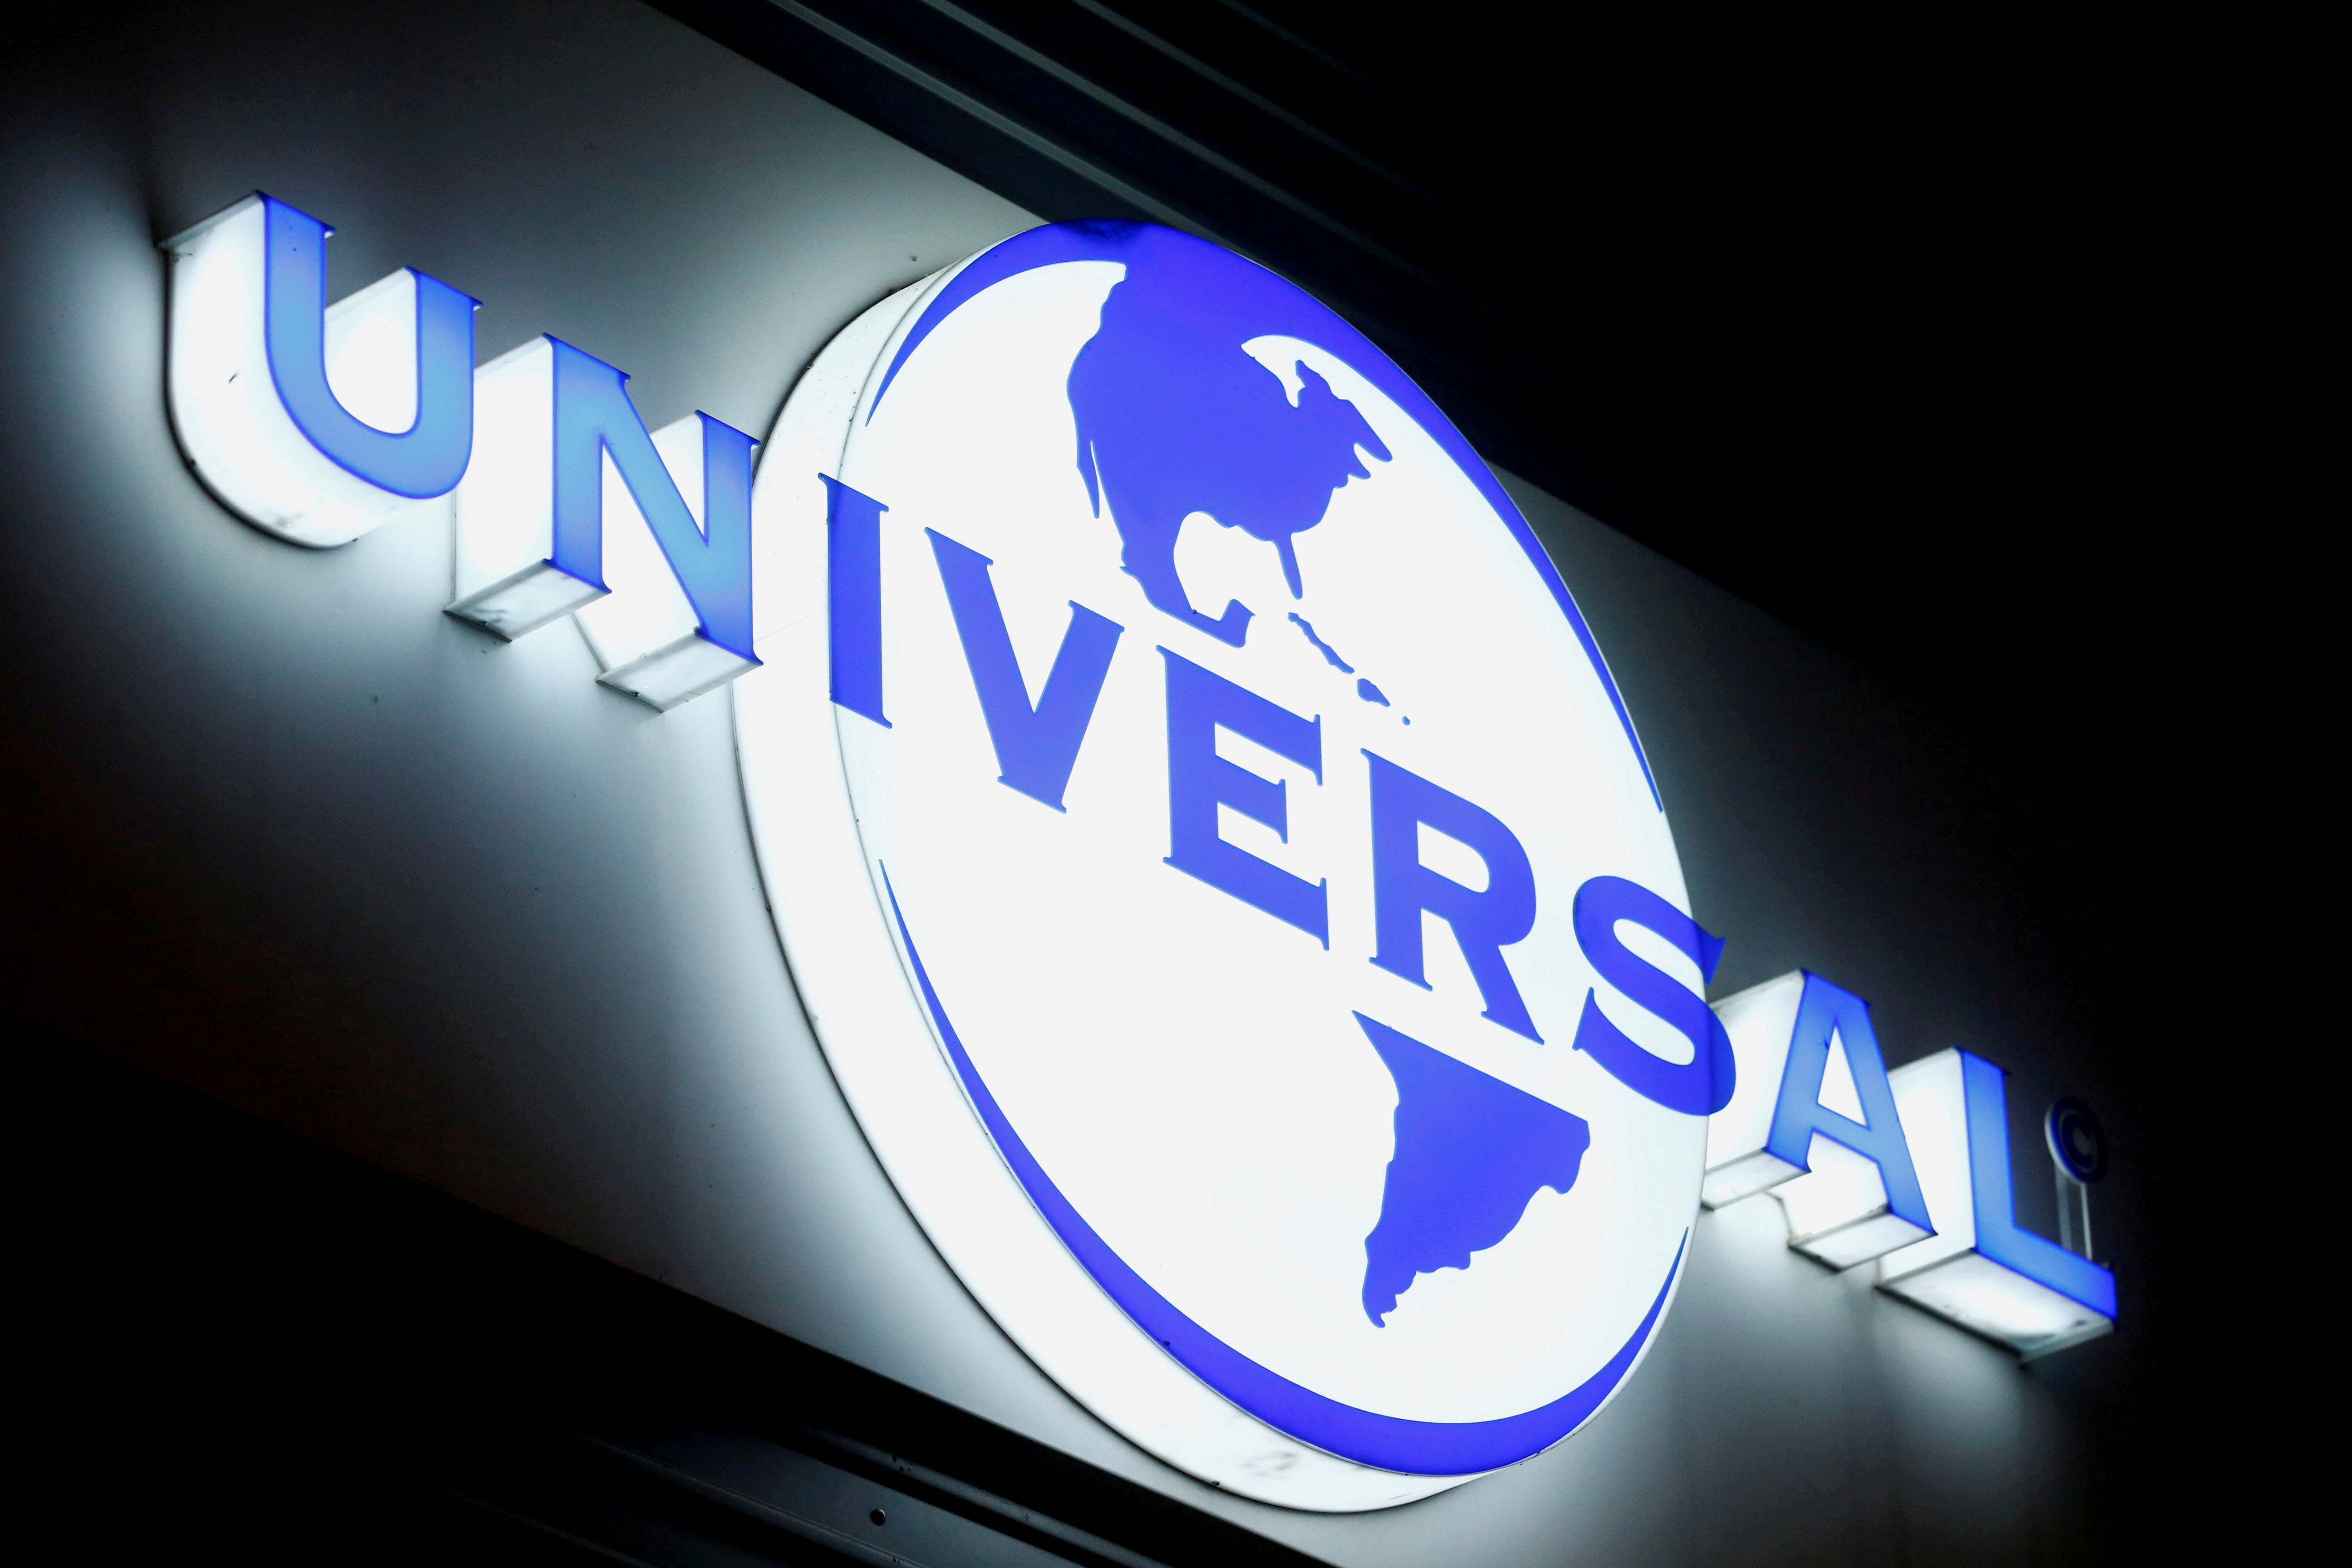 Universal Music Group’s core earnings up 21, boosted by streaming